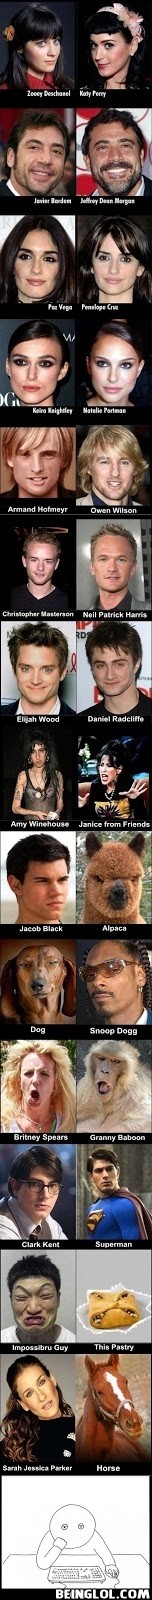 Celebrity Look a Likes.